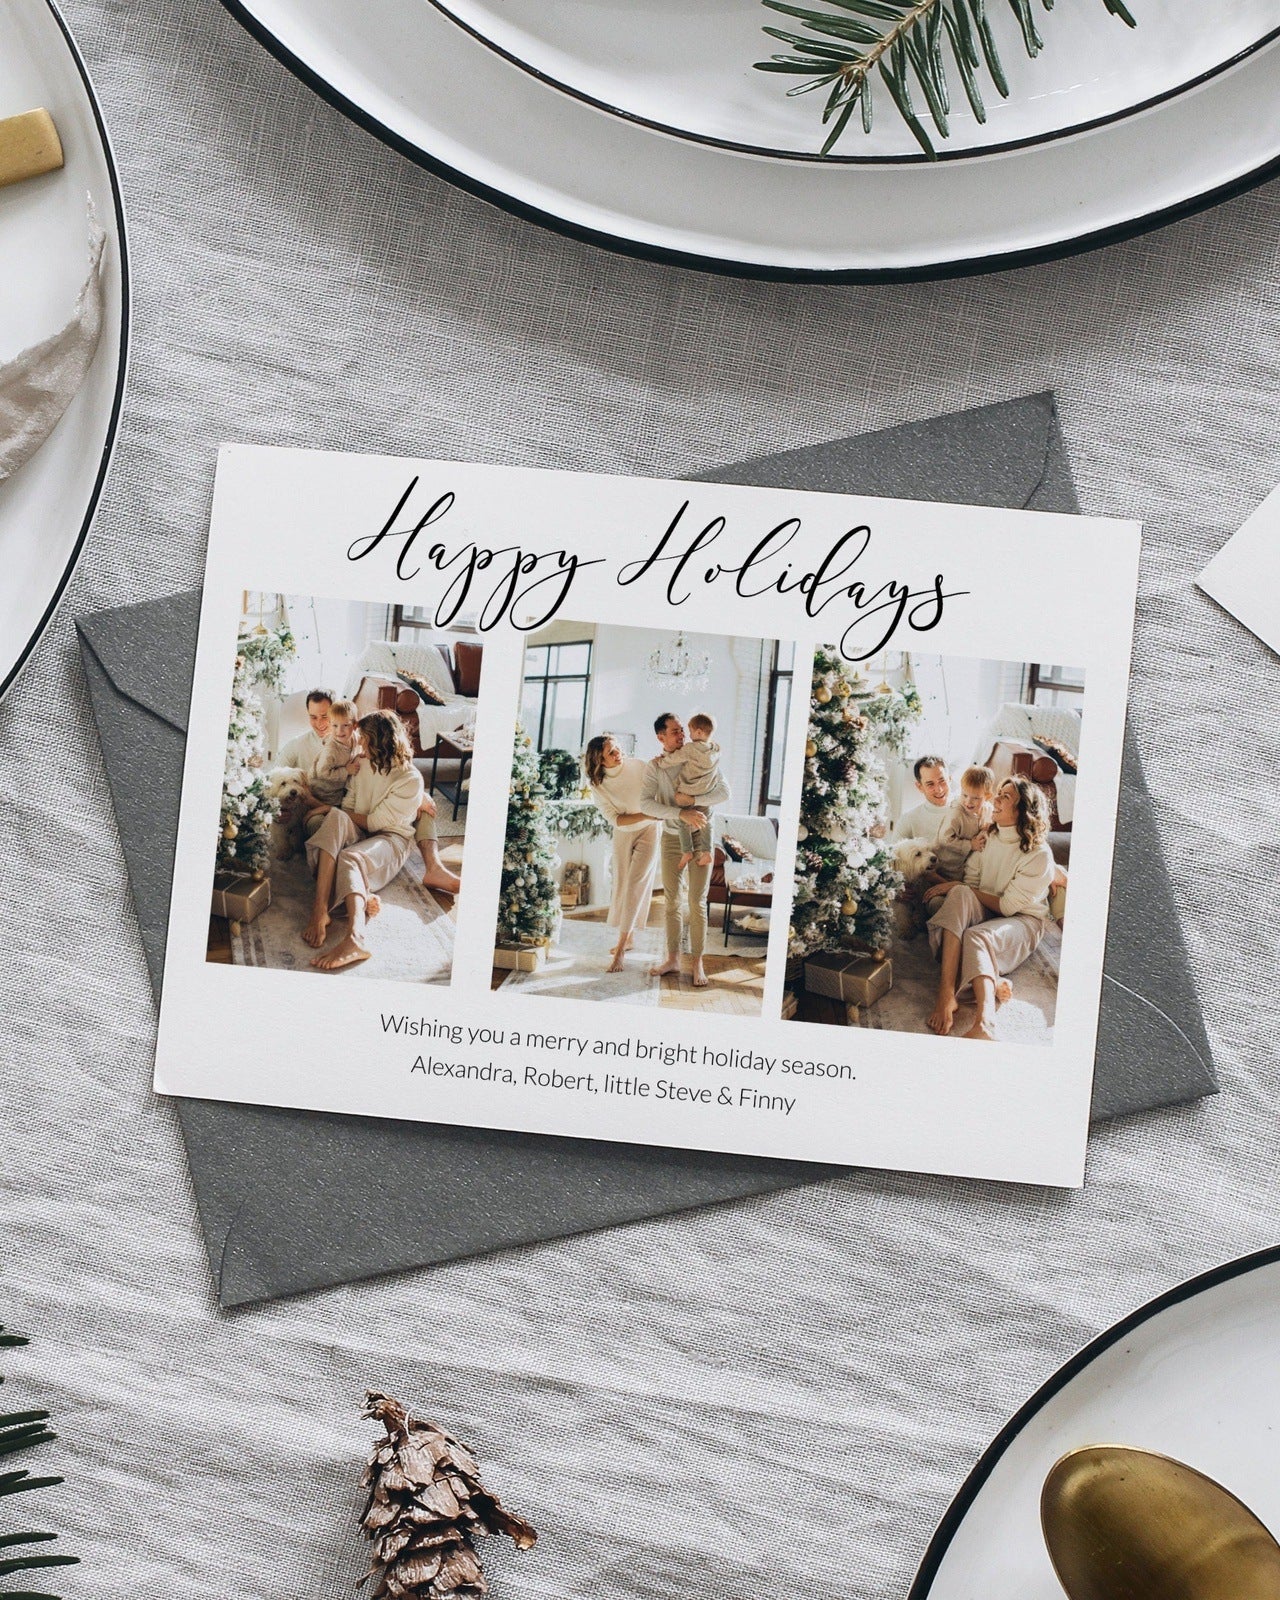 Happy Holidays Card Template 2022 Photo Christmas Card for husband son family or friends